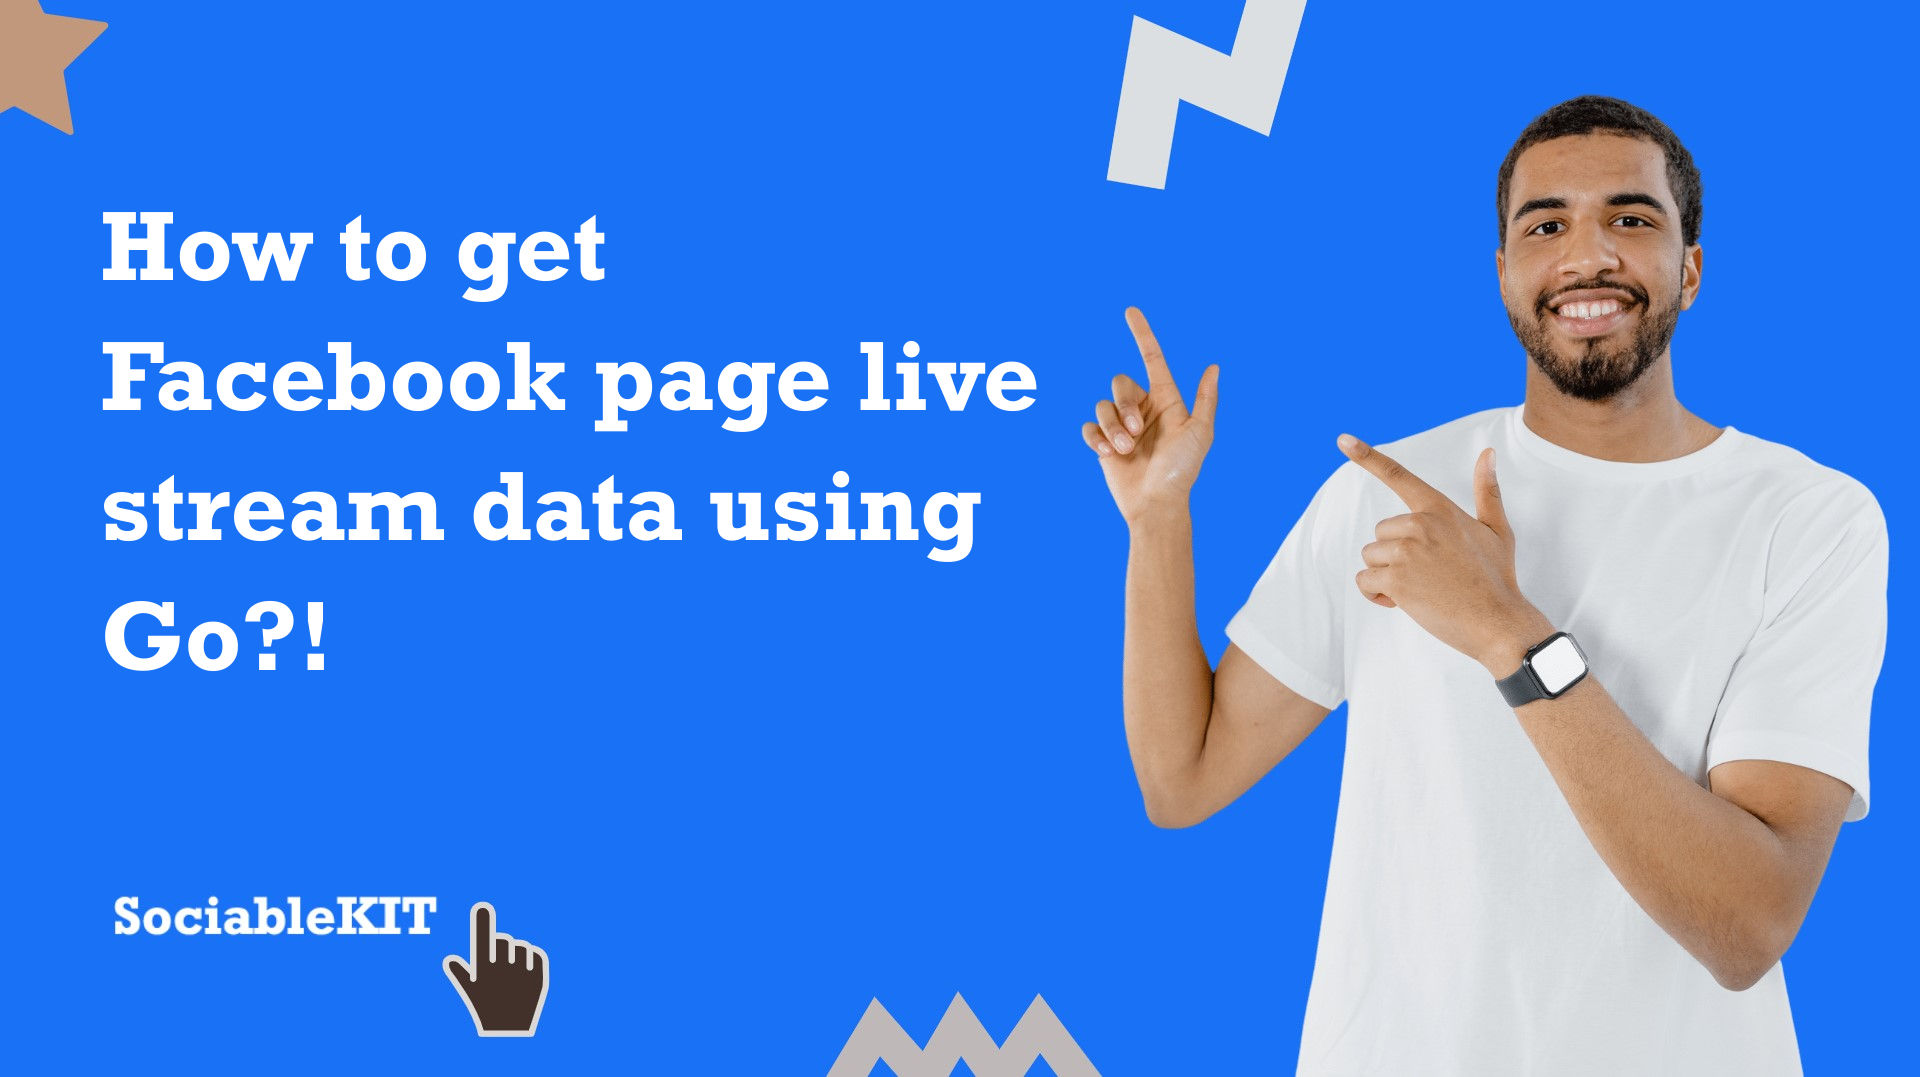 How to get Facebook page live stream data using Go?